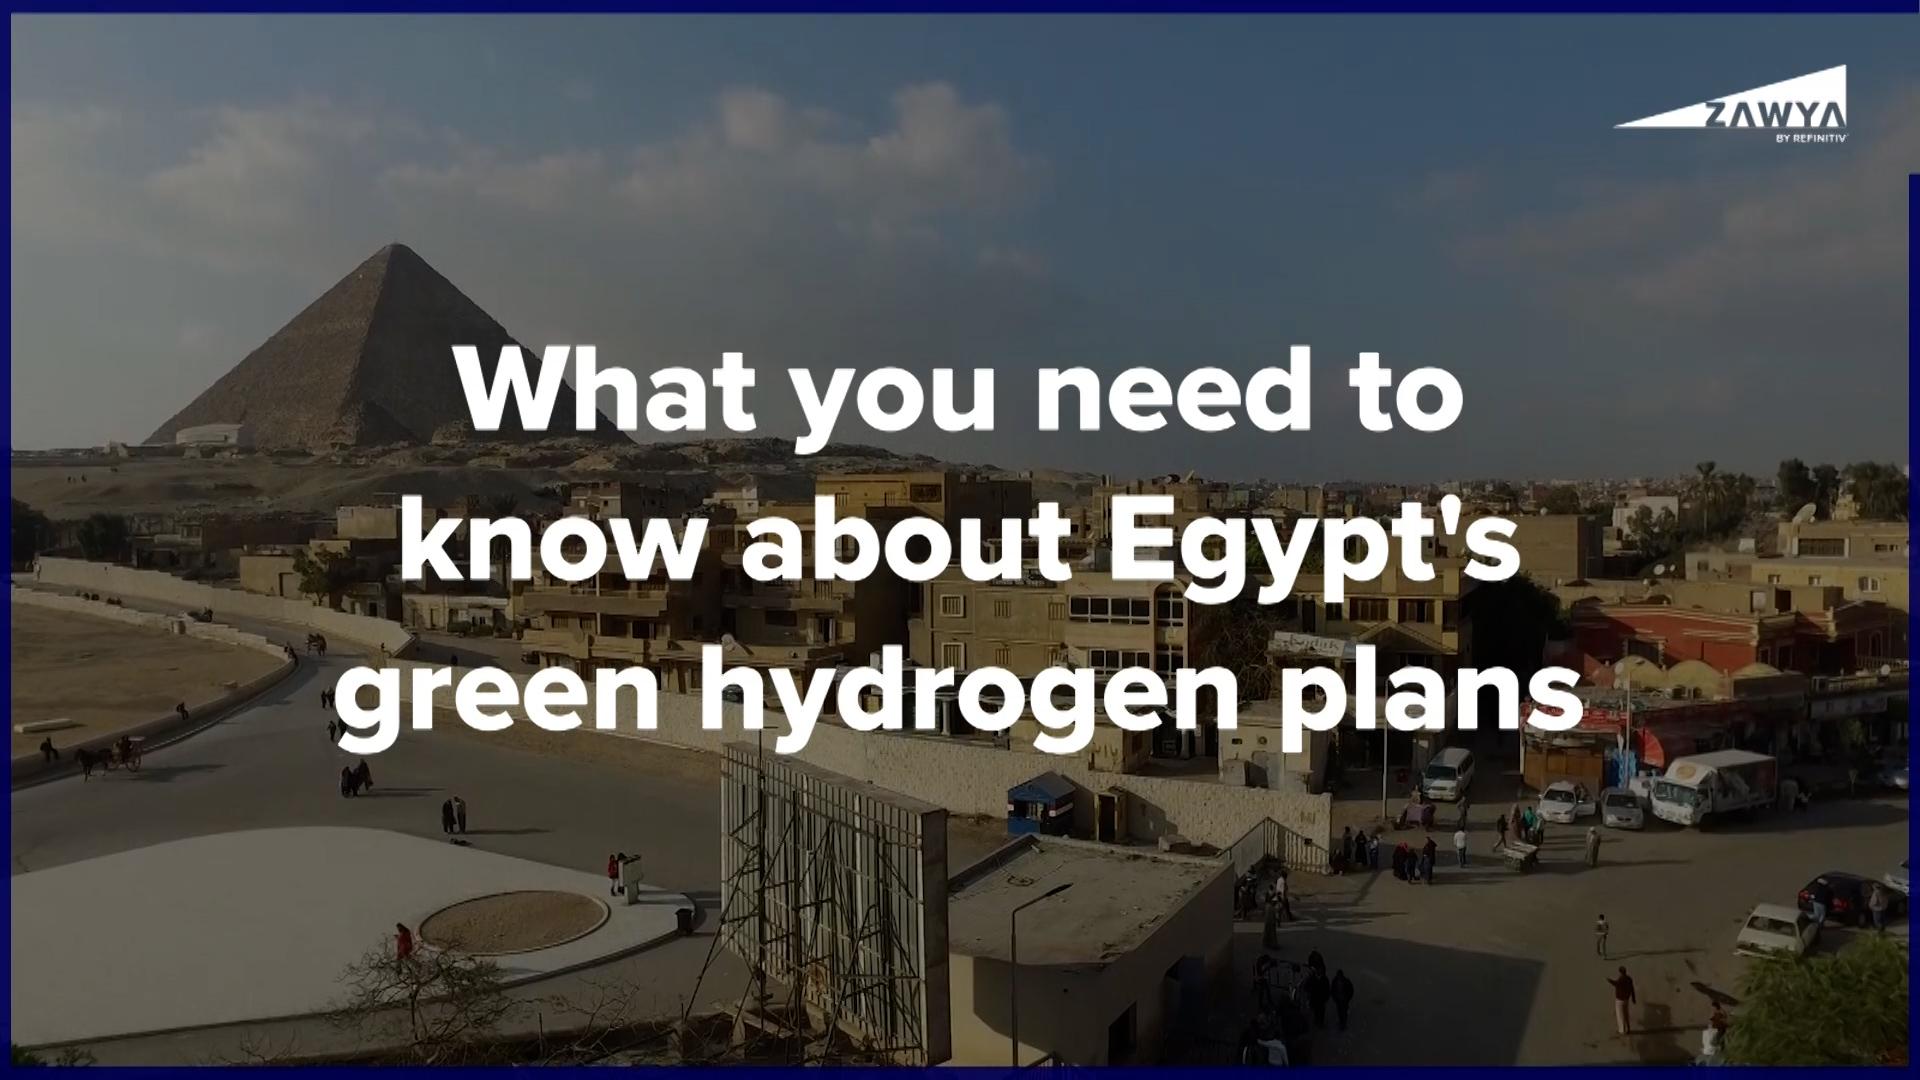 VIDEO: What you need to know about Egypt's green hydrogen plans